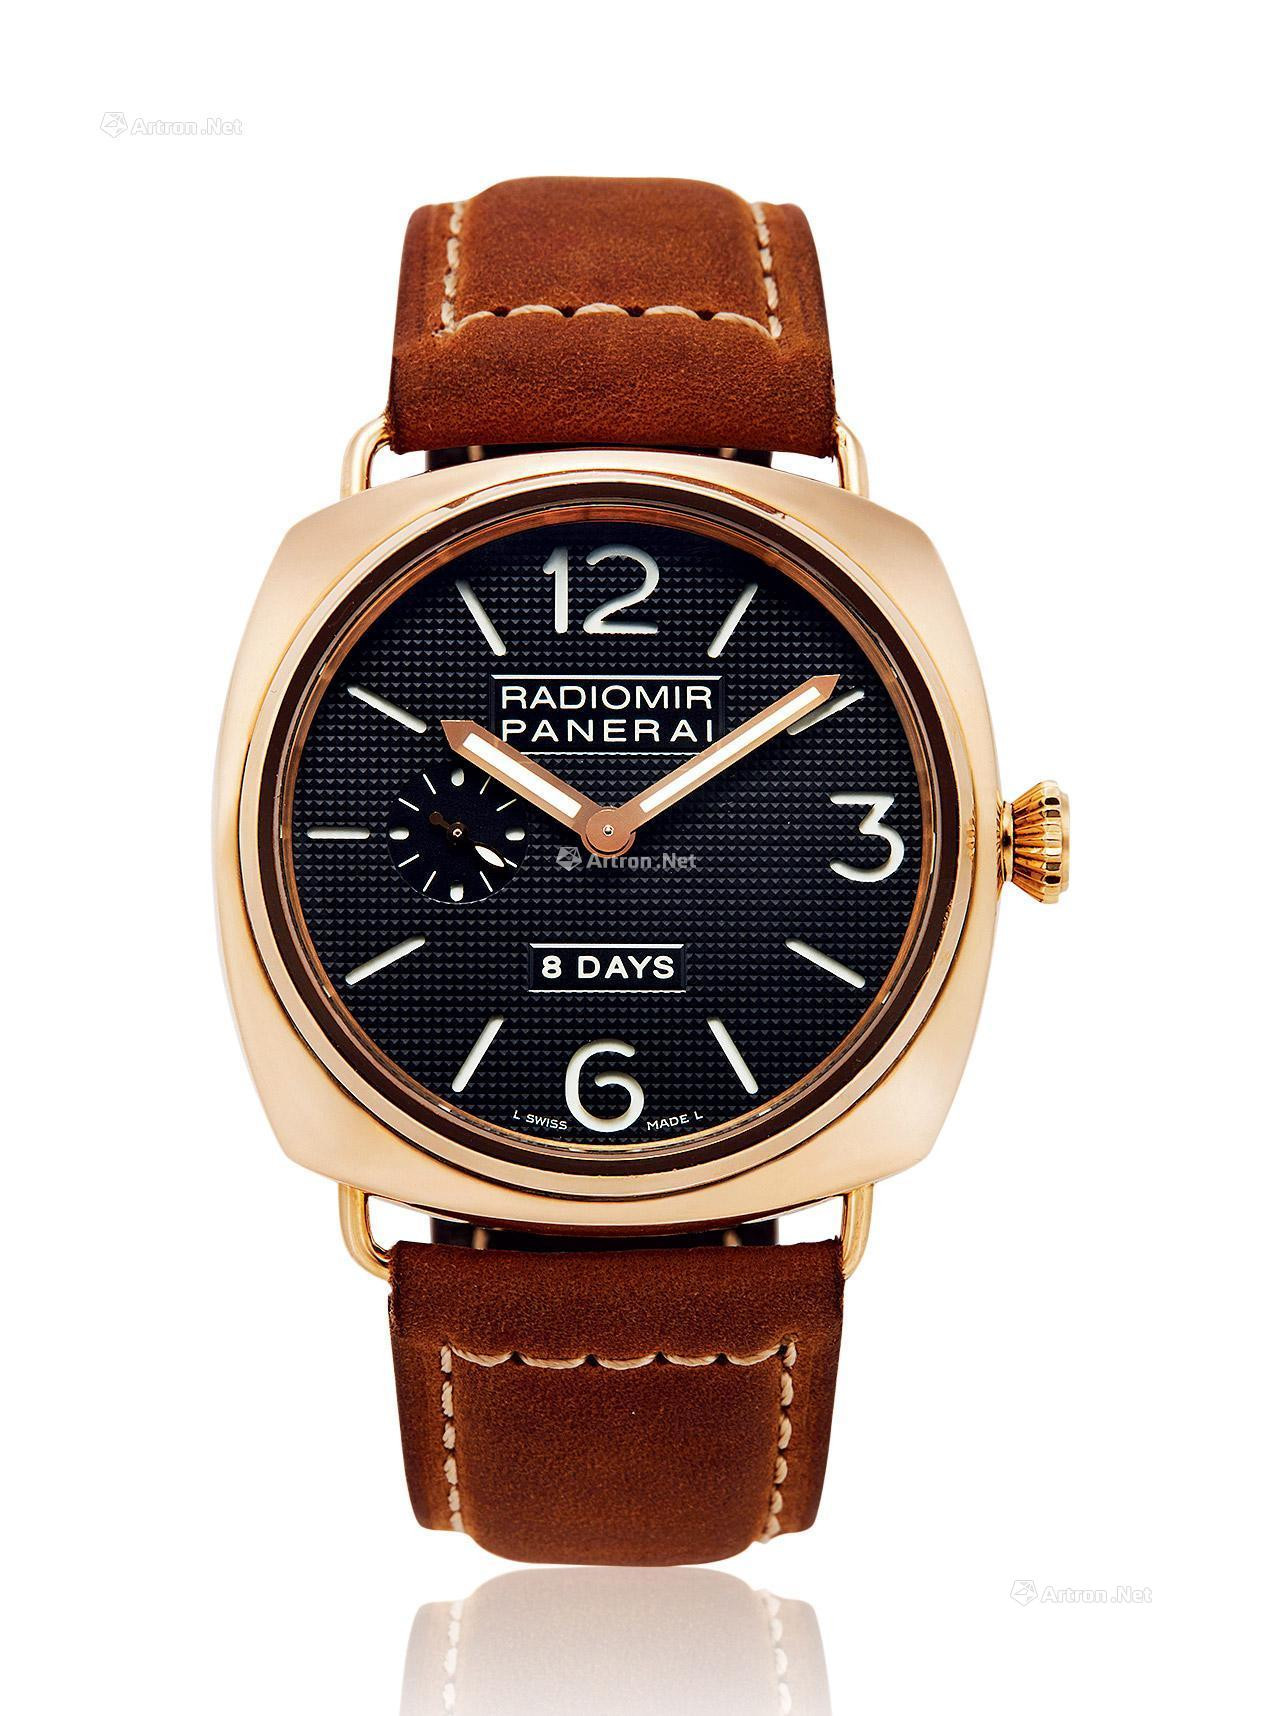 PANERAI A YELLOW GOLD MANUALLY-WOUND WRISTWATCH WITH 8 DAYS POWER-RESERVE INDICATION